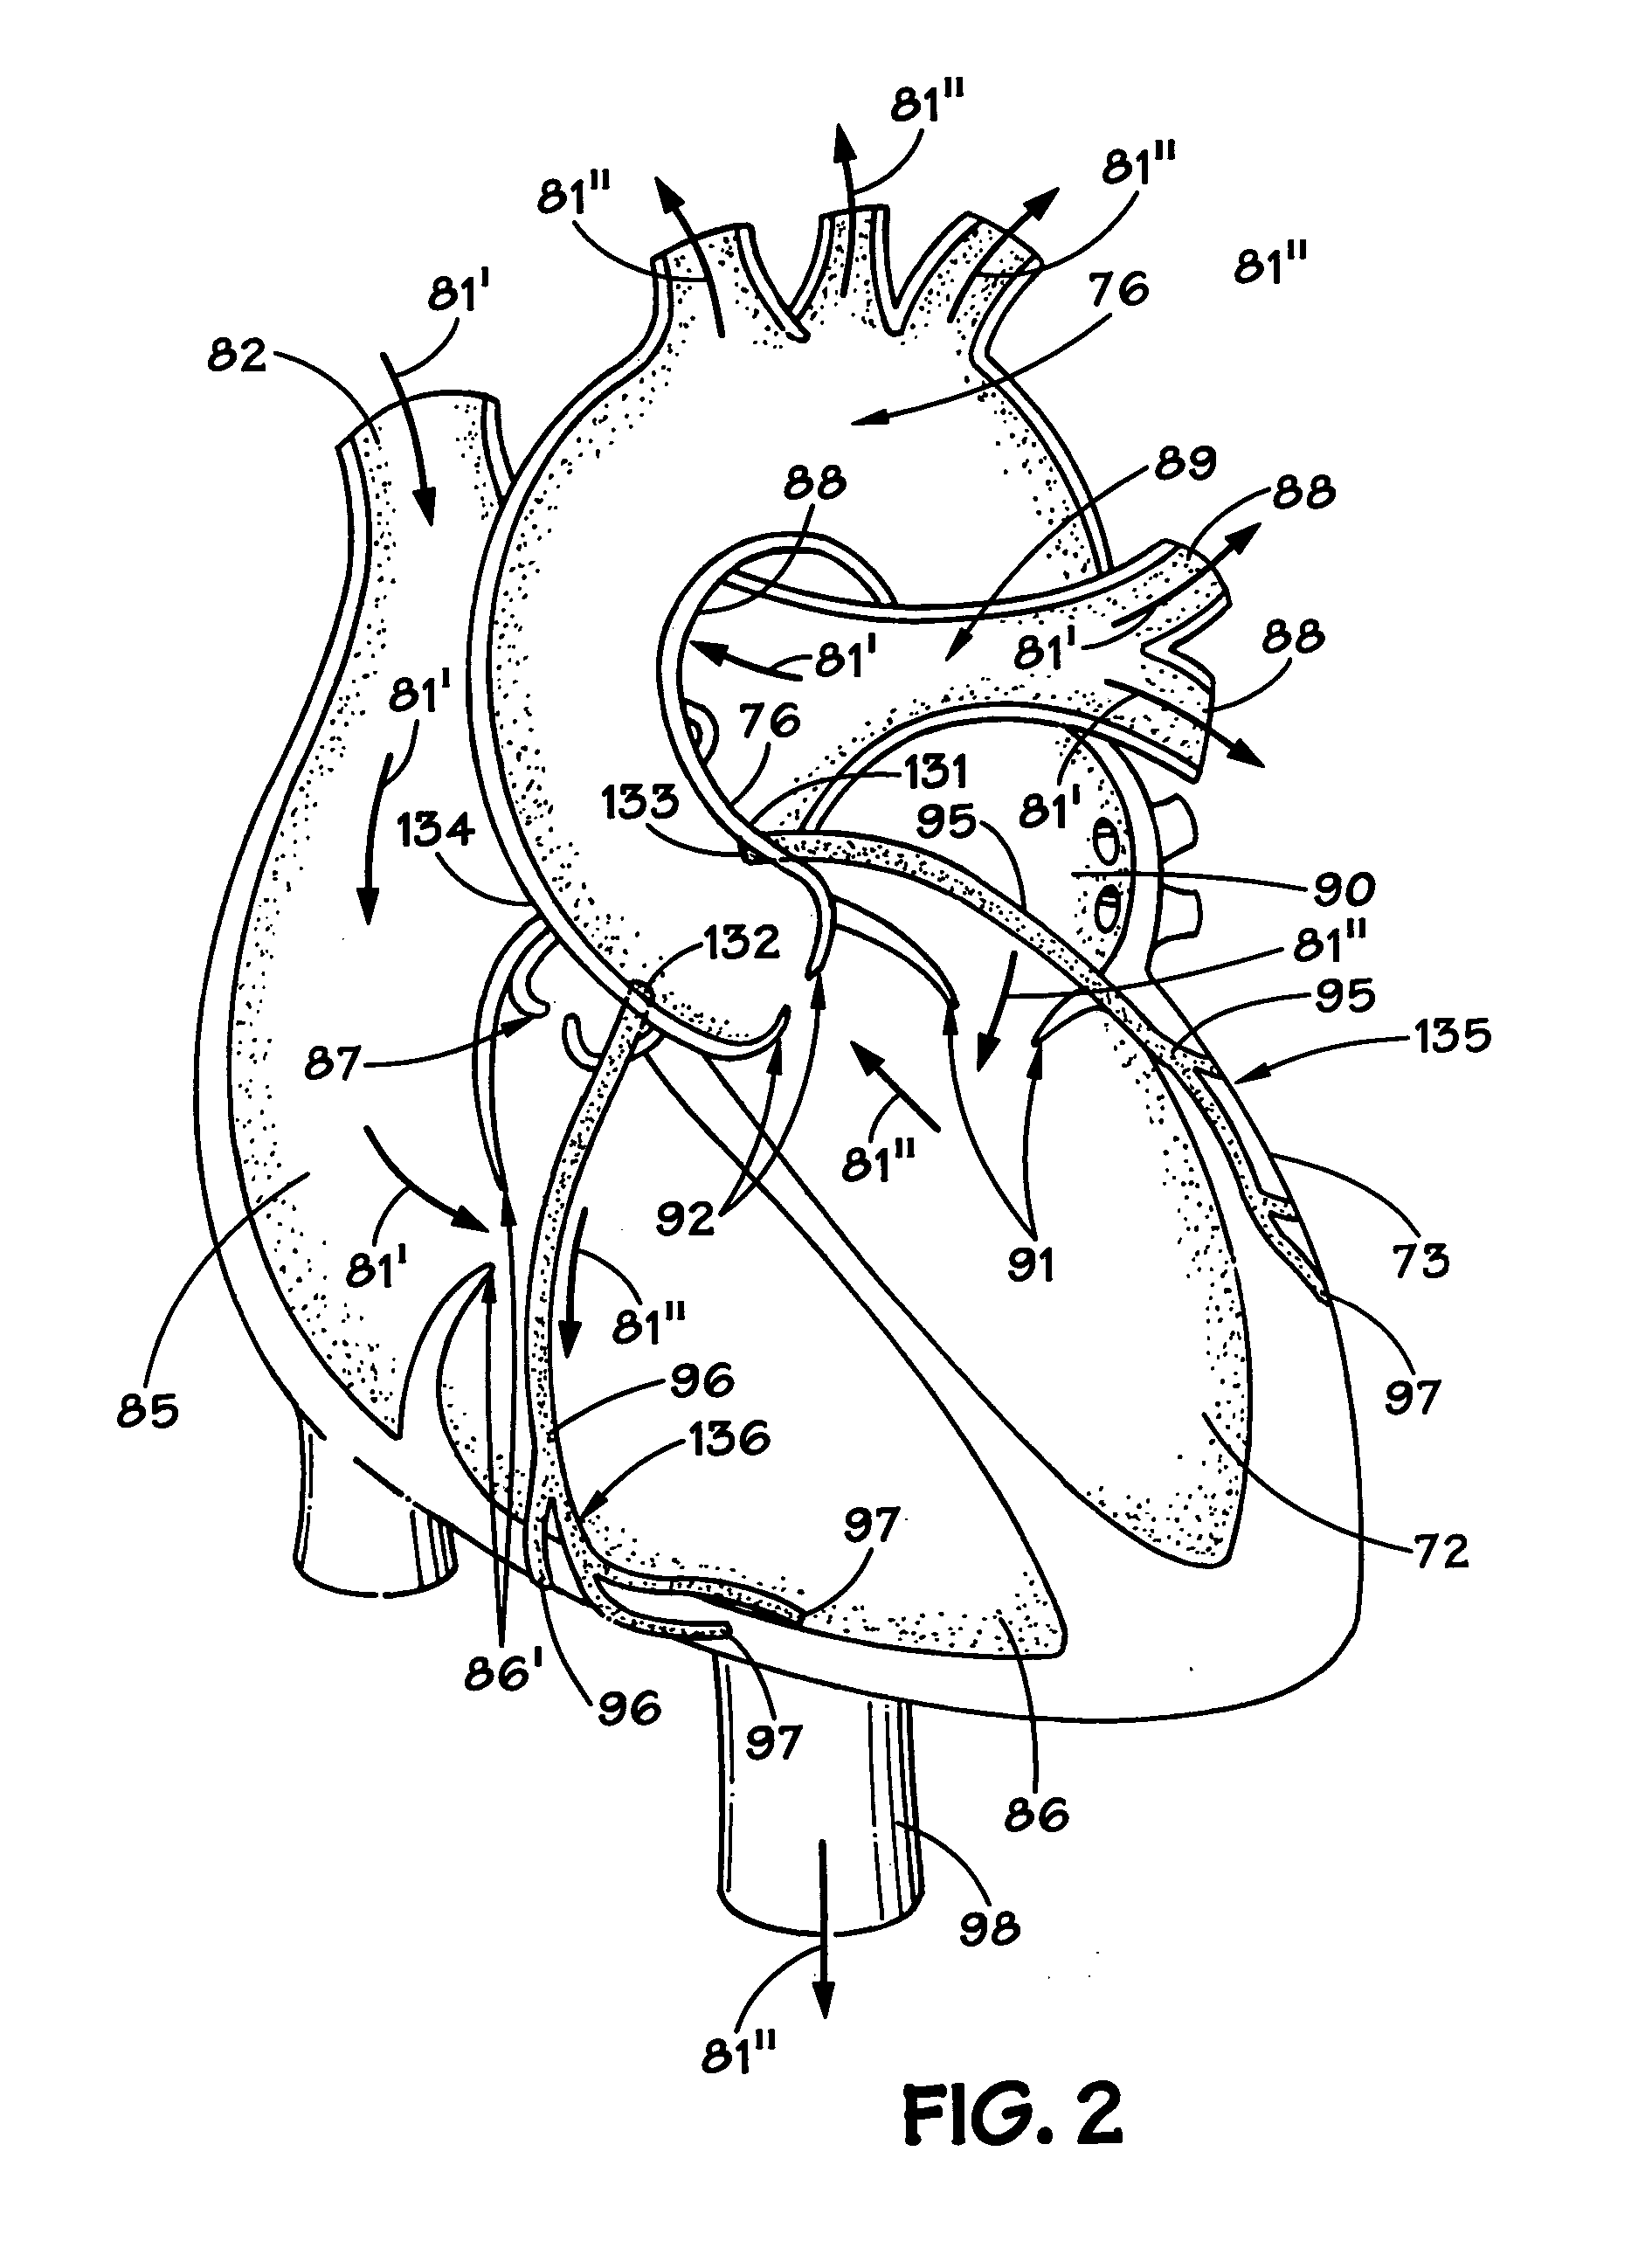 Method and apparatus for long-term assisting a left ventricle to pump blood